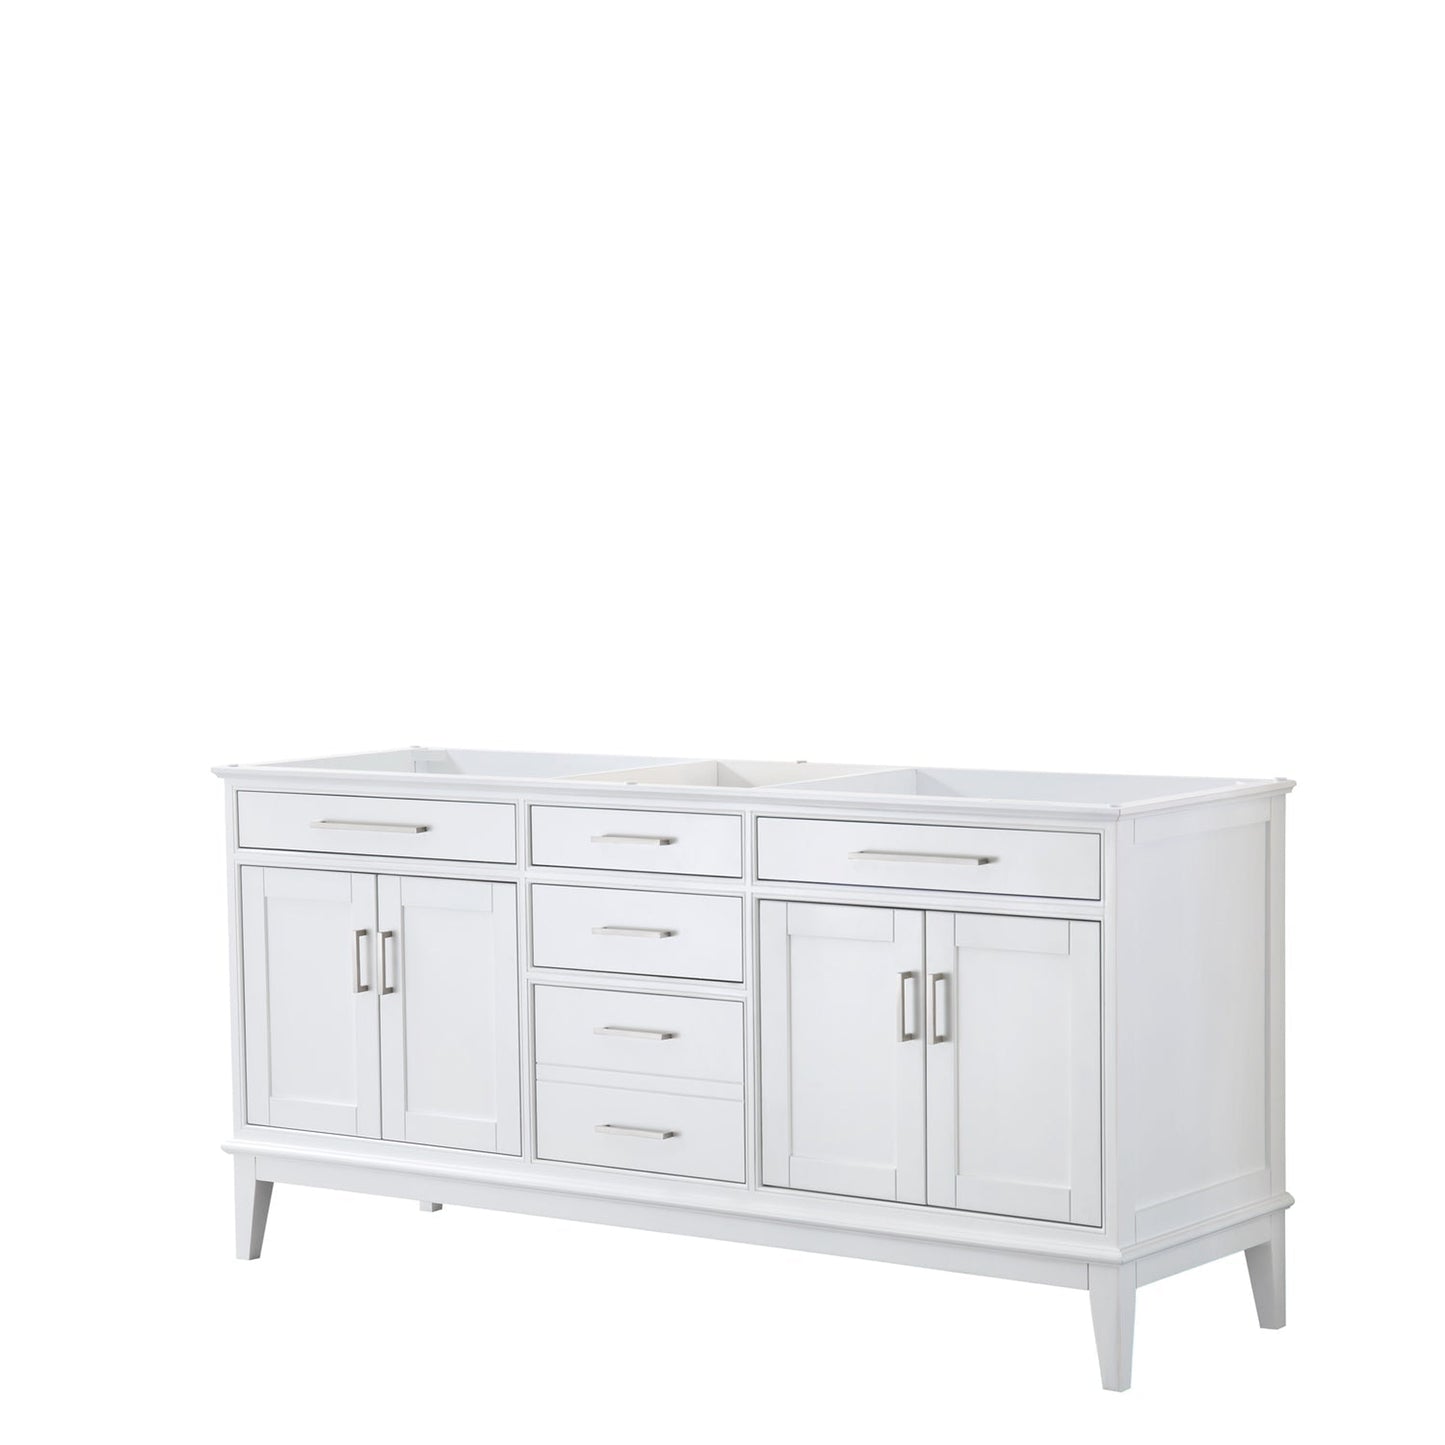 Wyndham Collection Margate 72" Double Bathroom White Vanity